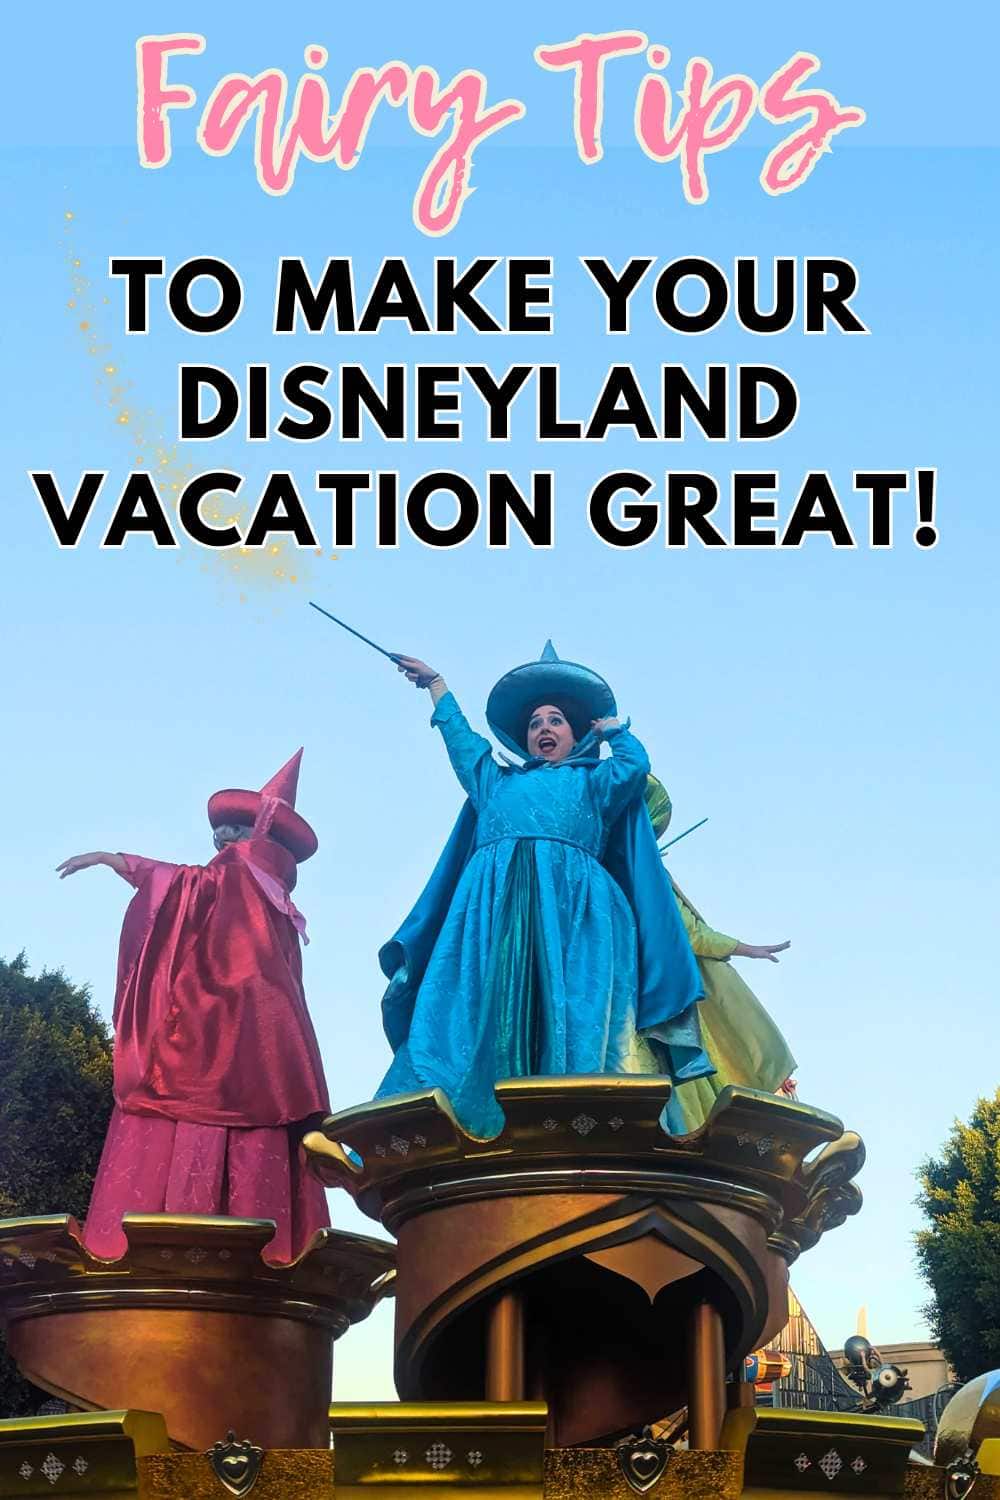 Planning a Disneyland trip? Avoid unnecessary stress and mishaps with our guide, "Steer Clear of These 4 Pitfalls for a Magical Disneyland Vacation!" We've identified common trip planning mistakes to help you maximize your Disney experience. Make memories, not mistakes! via @pullingcurls